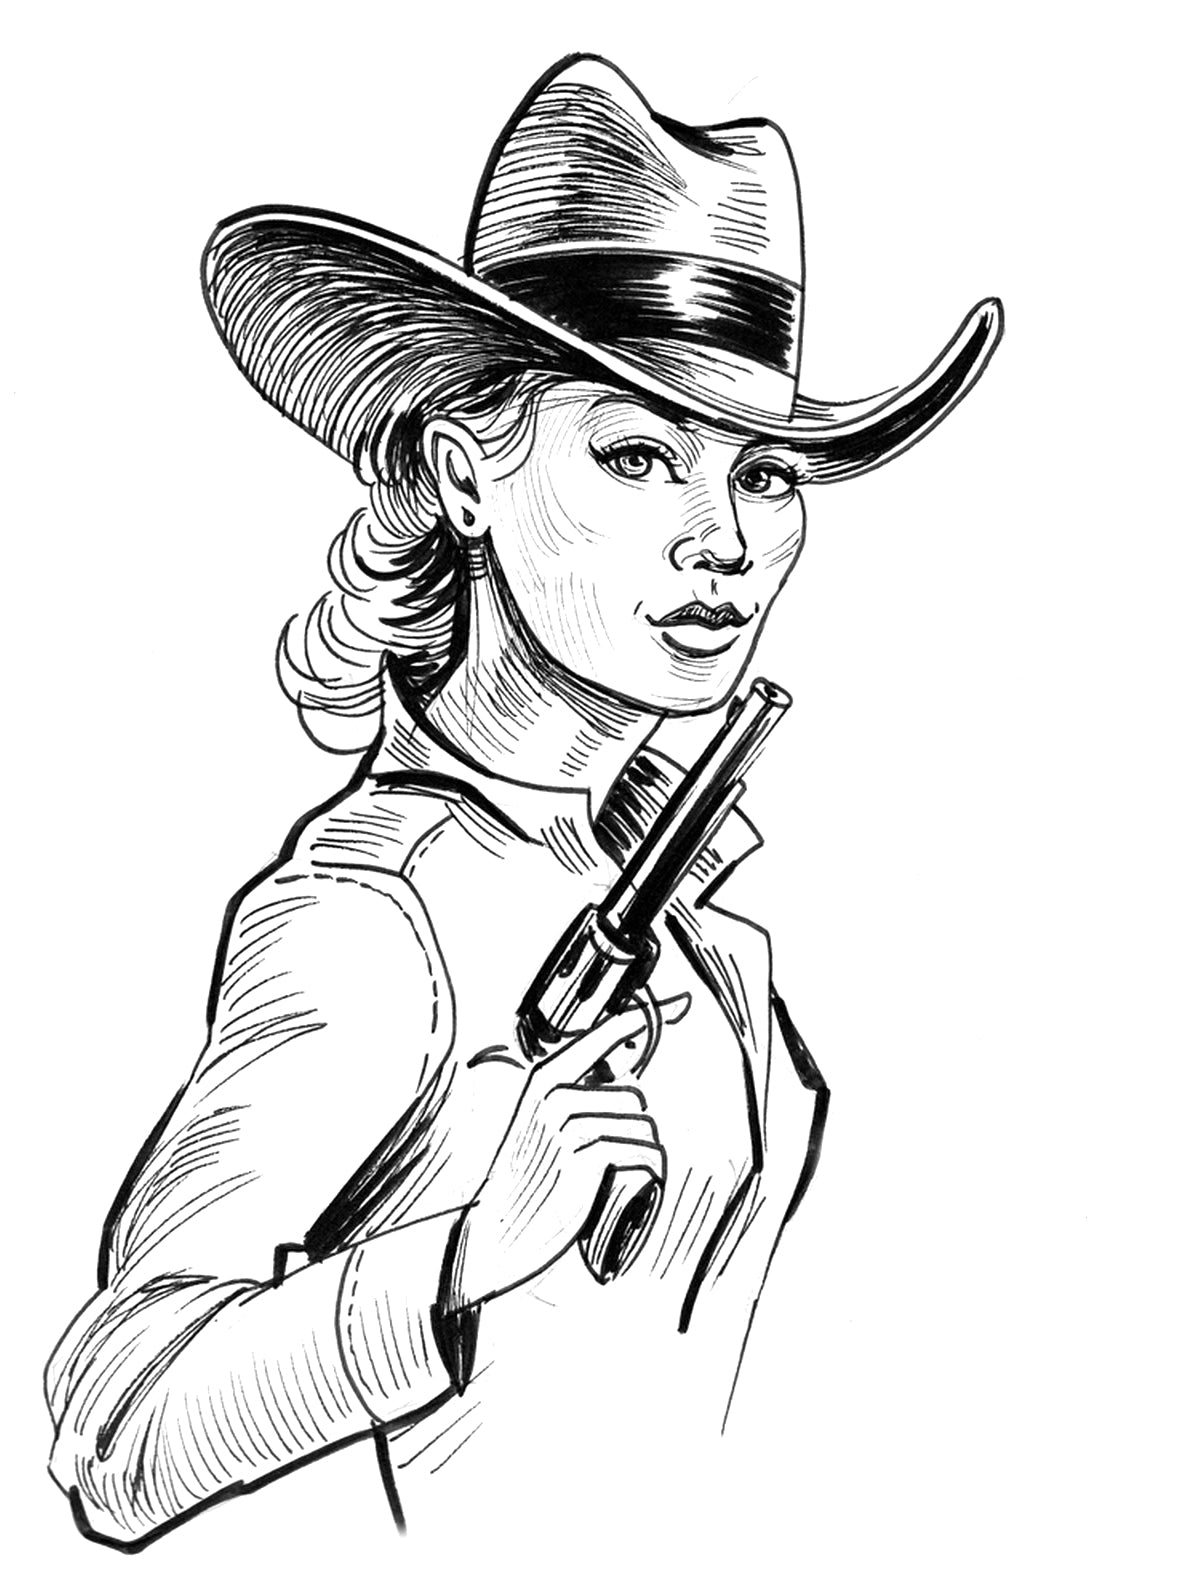 Wild West - Coloring Book With Cowboys & Cowgirls, Sheriffs & Villains